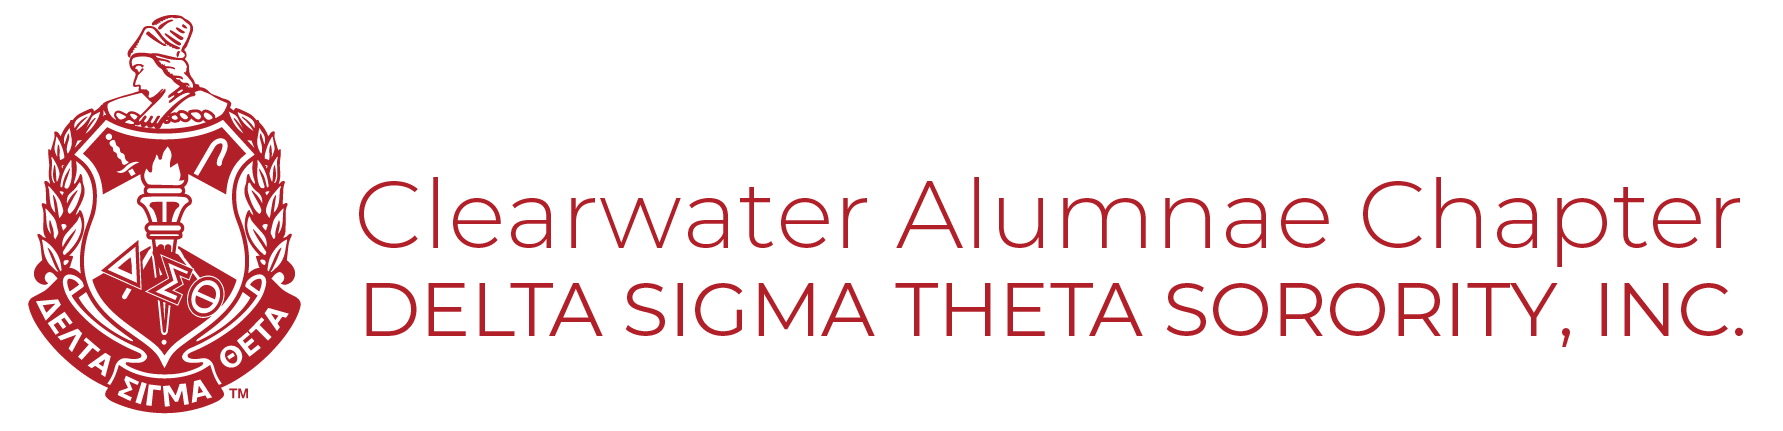 Clearwater Alumnae Chapter of Delta Sigma Theta Sorority, Inc.